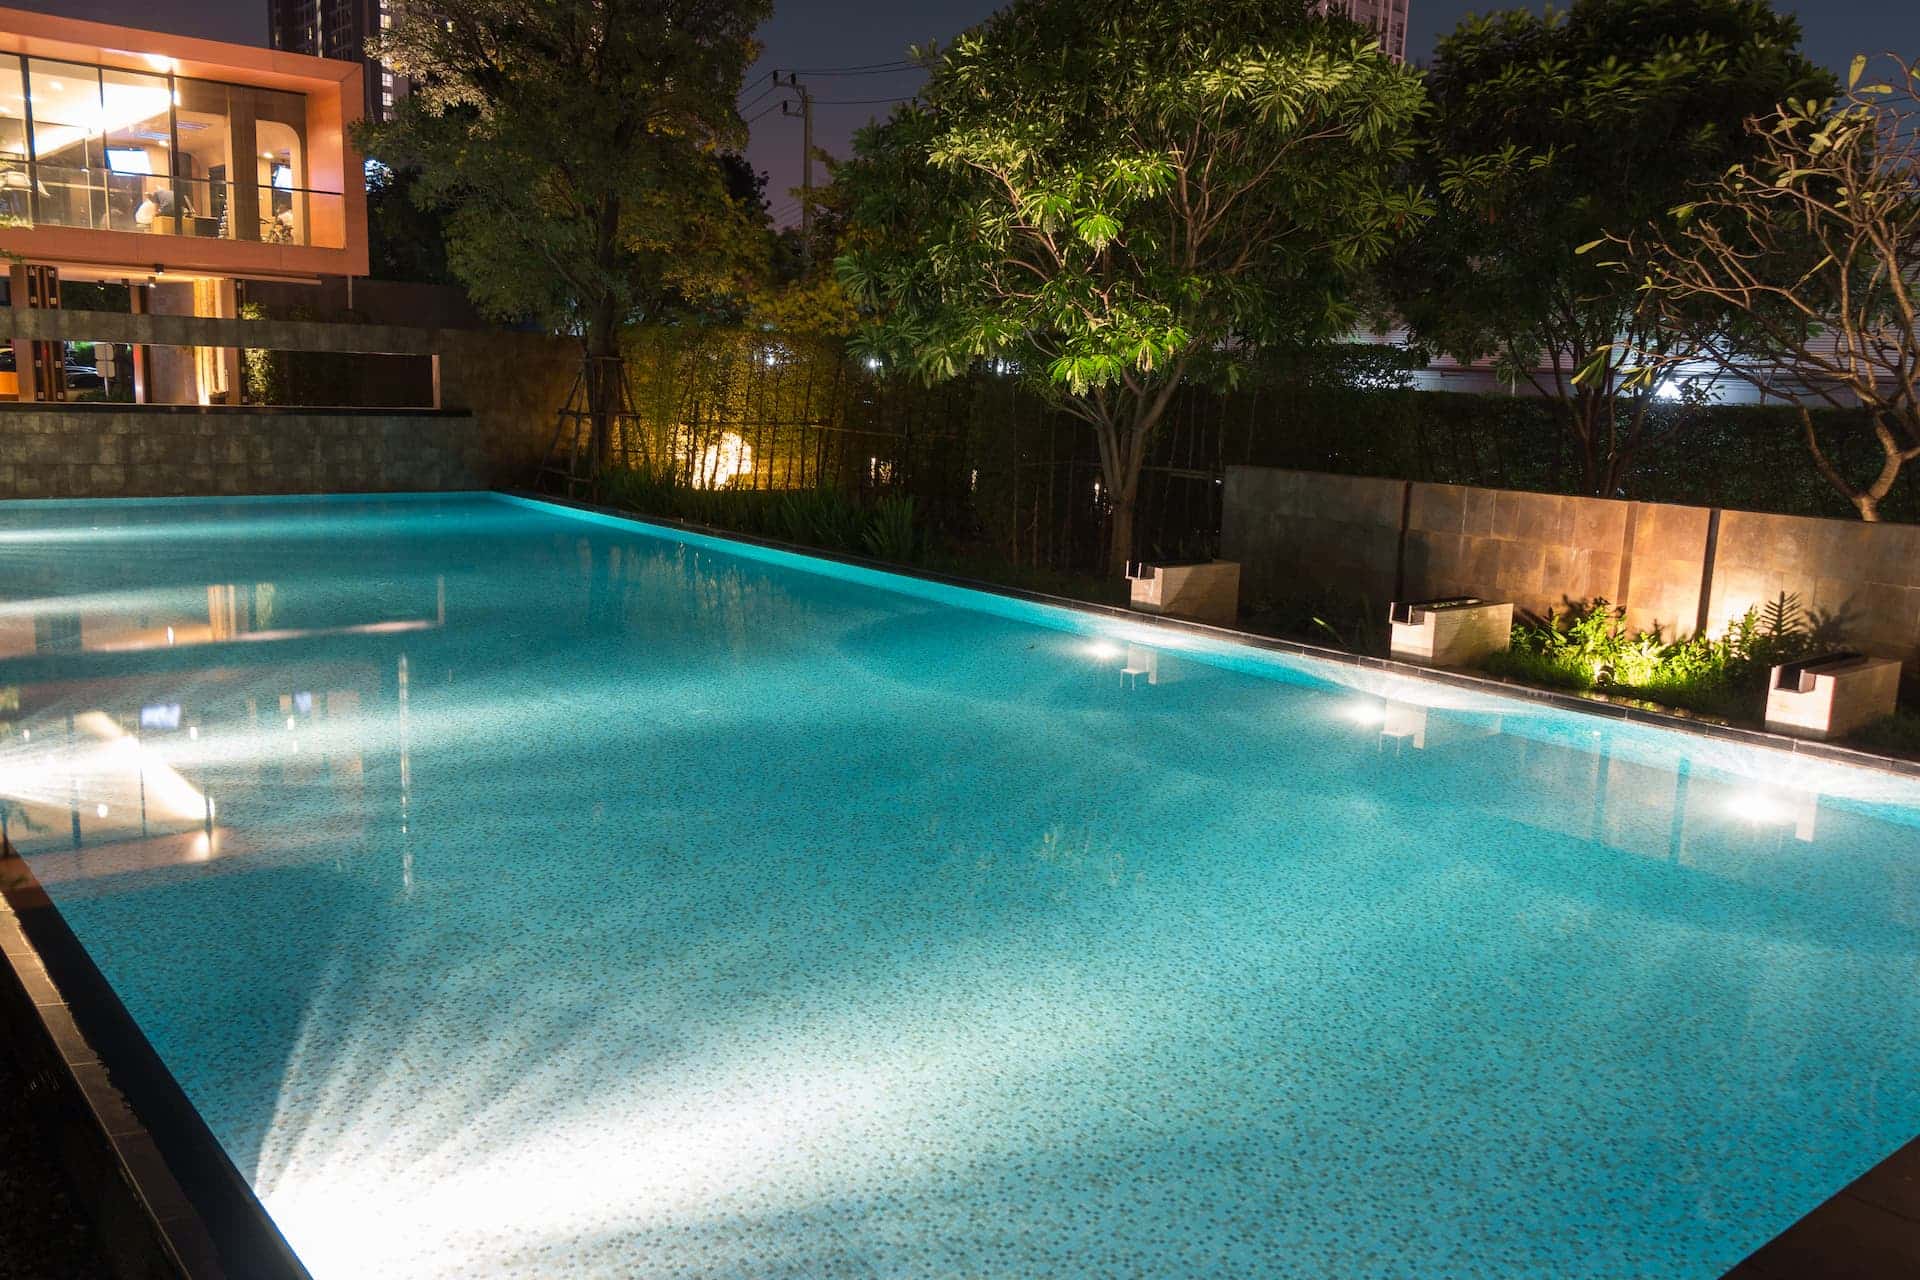 A pool with beautiful lighting comes with inground pool financing from HFS Financial.